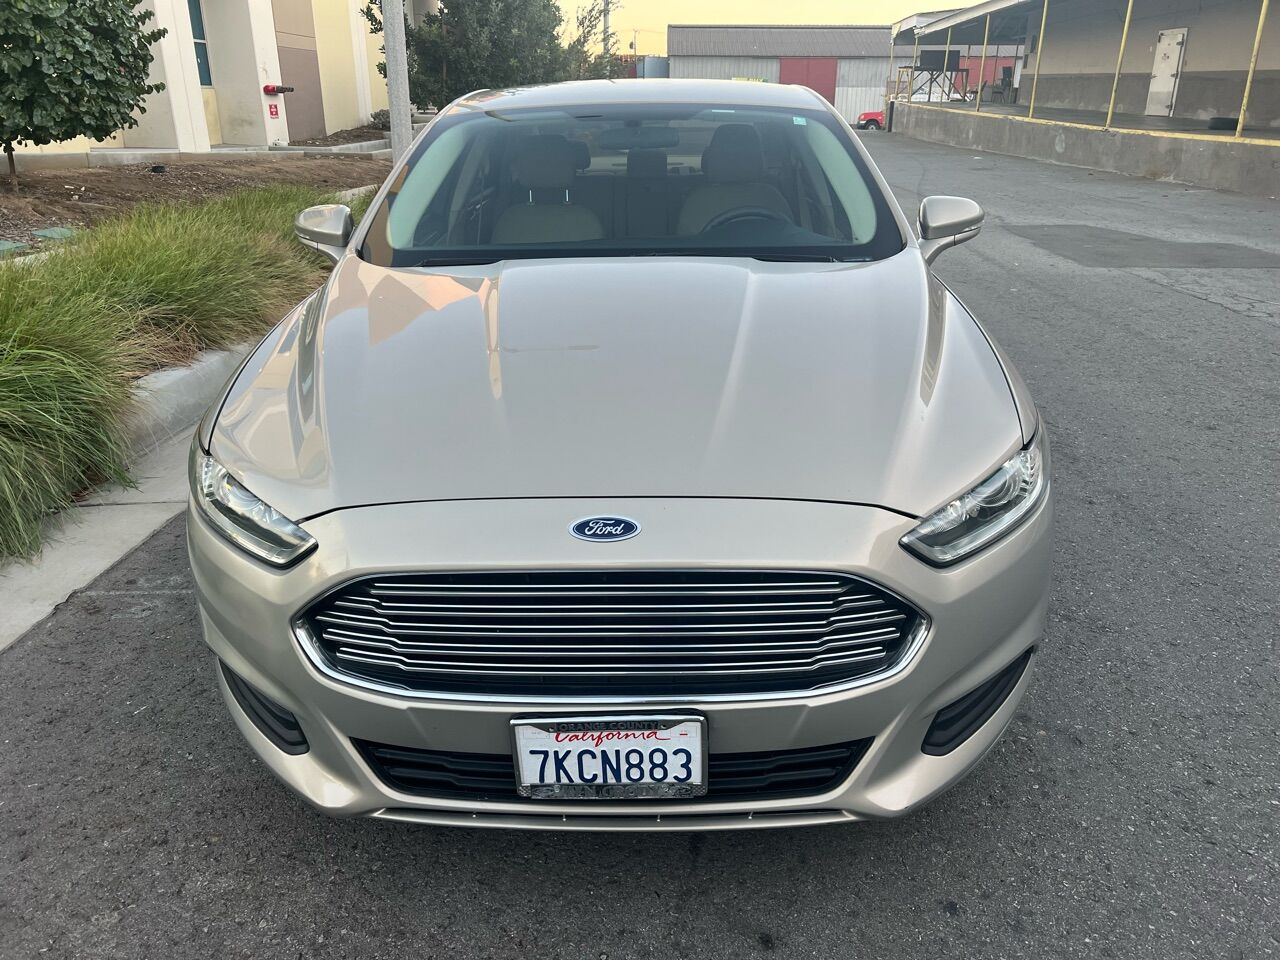 2015 Ford Fusion Hybrid For Sale - Carsforsale.com®